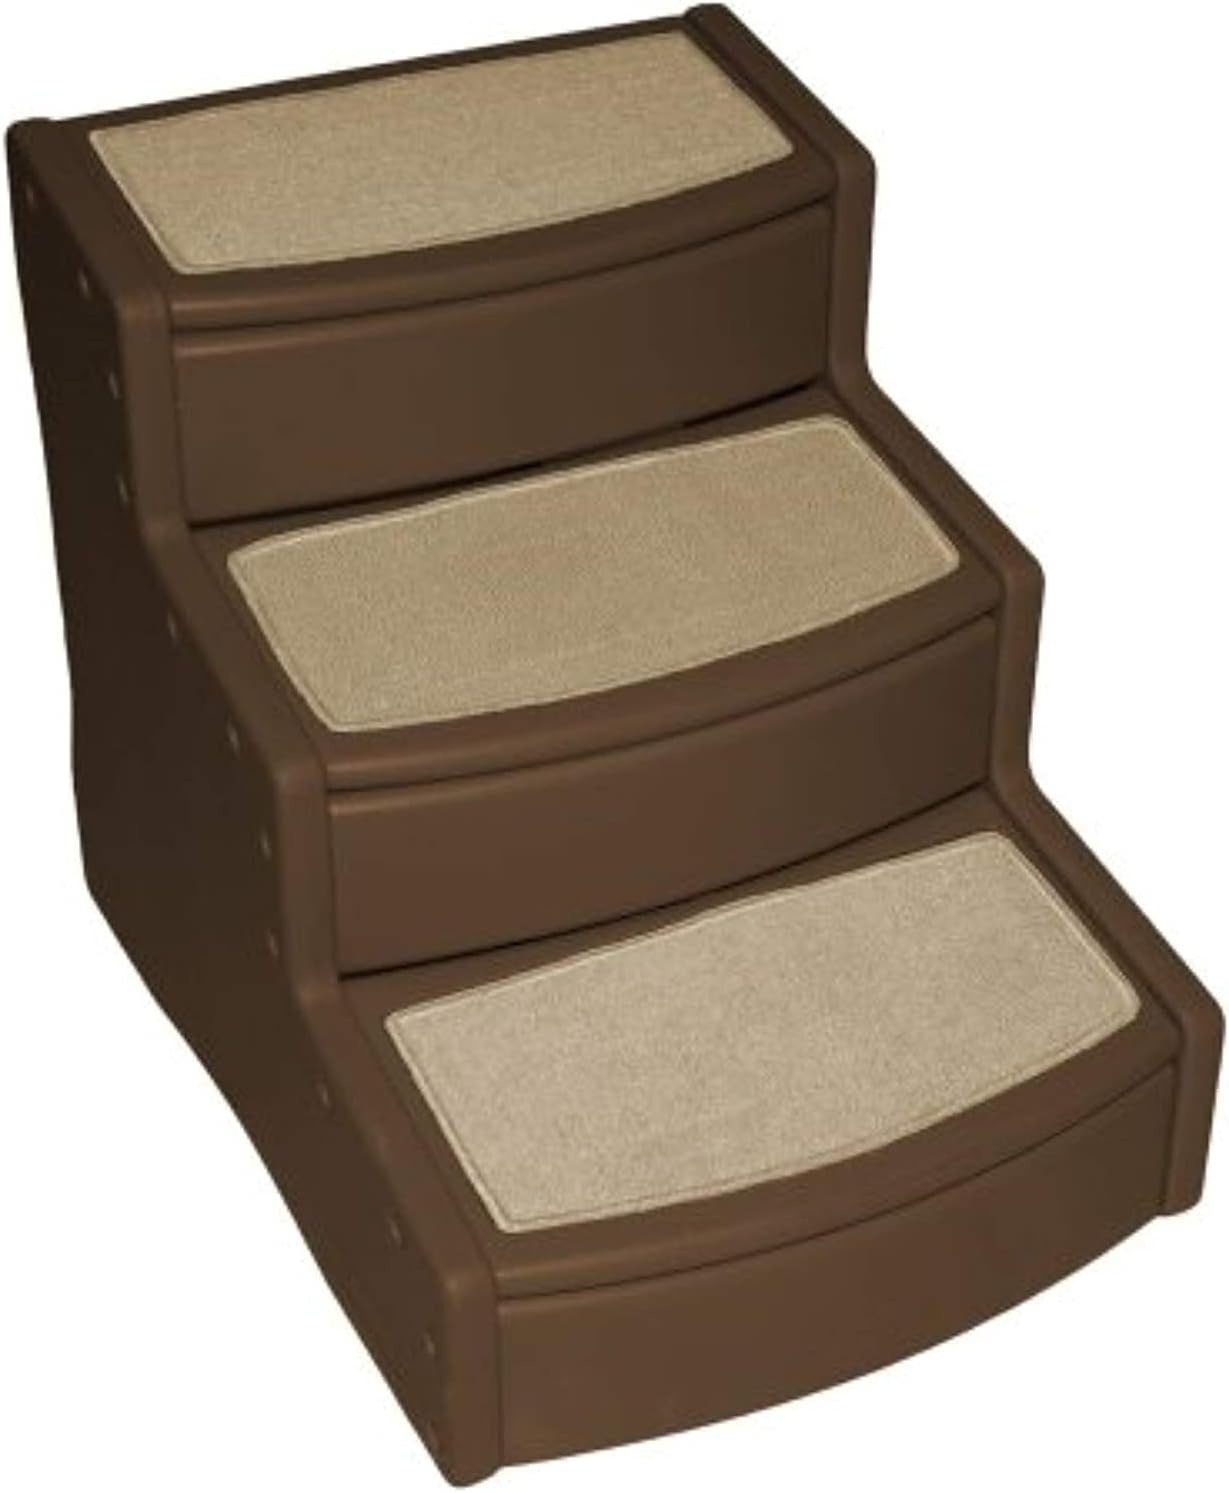 Pet Gear Easy Step III Extra Wide Pet Stairs, 3 Step for Dogs\/Cats up to 200 pounds, Removable\/Washable Carpet, Easy Assembly (No Tools Required) 3 Colors